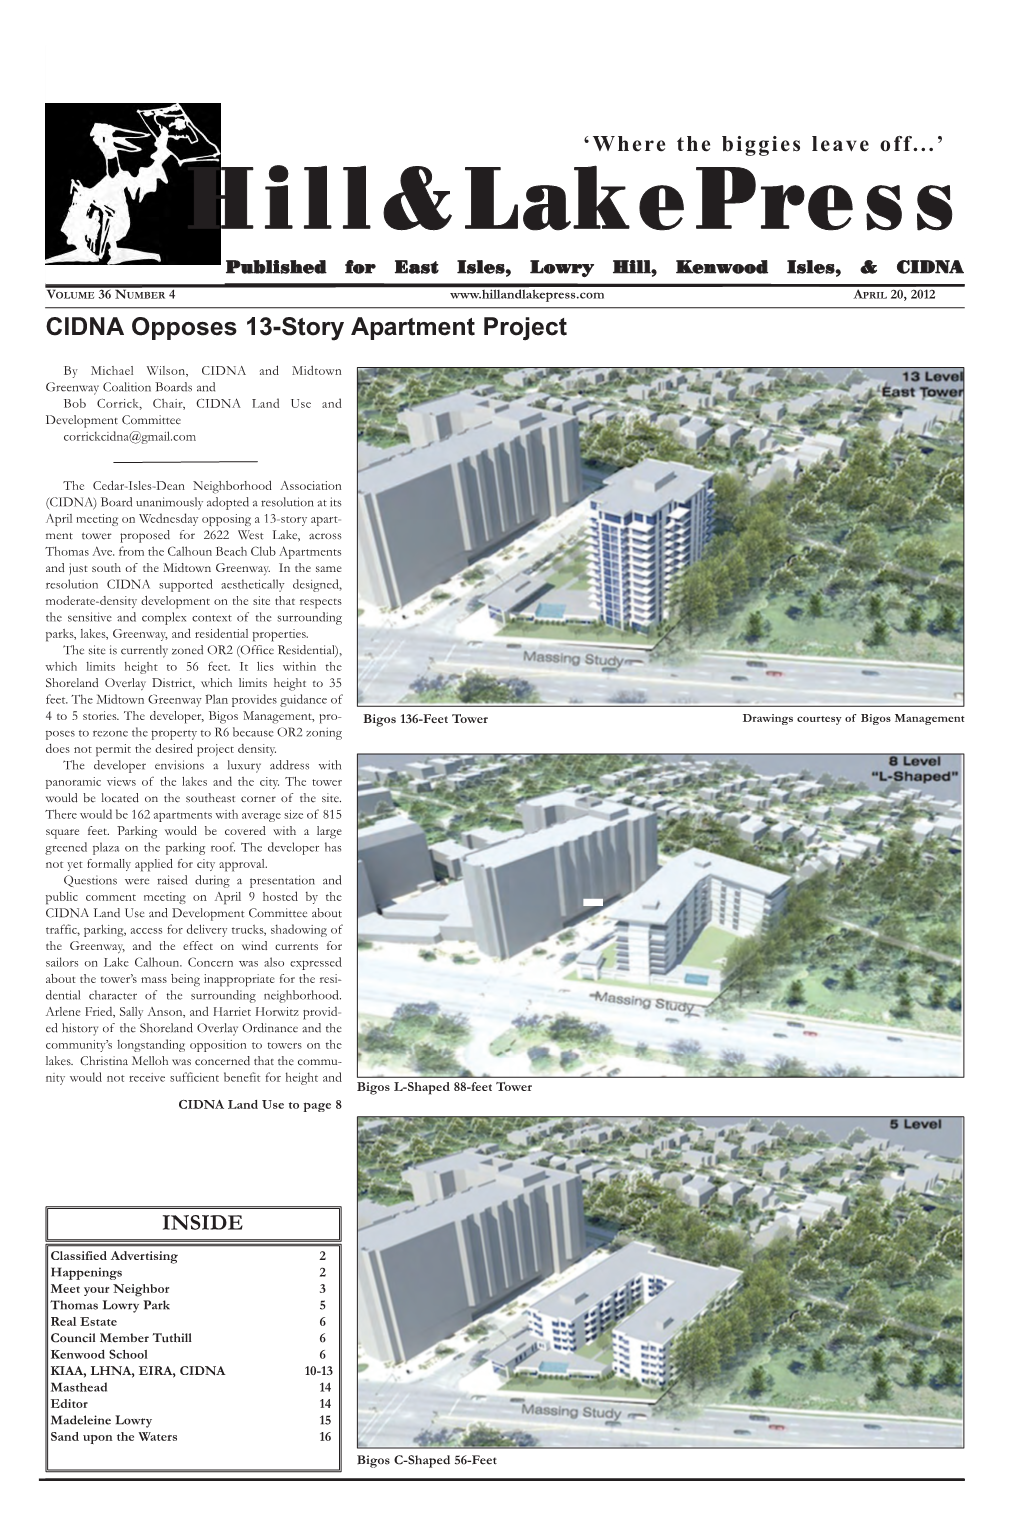 CIDNA Opposes 13-Story Apartment Project